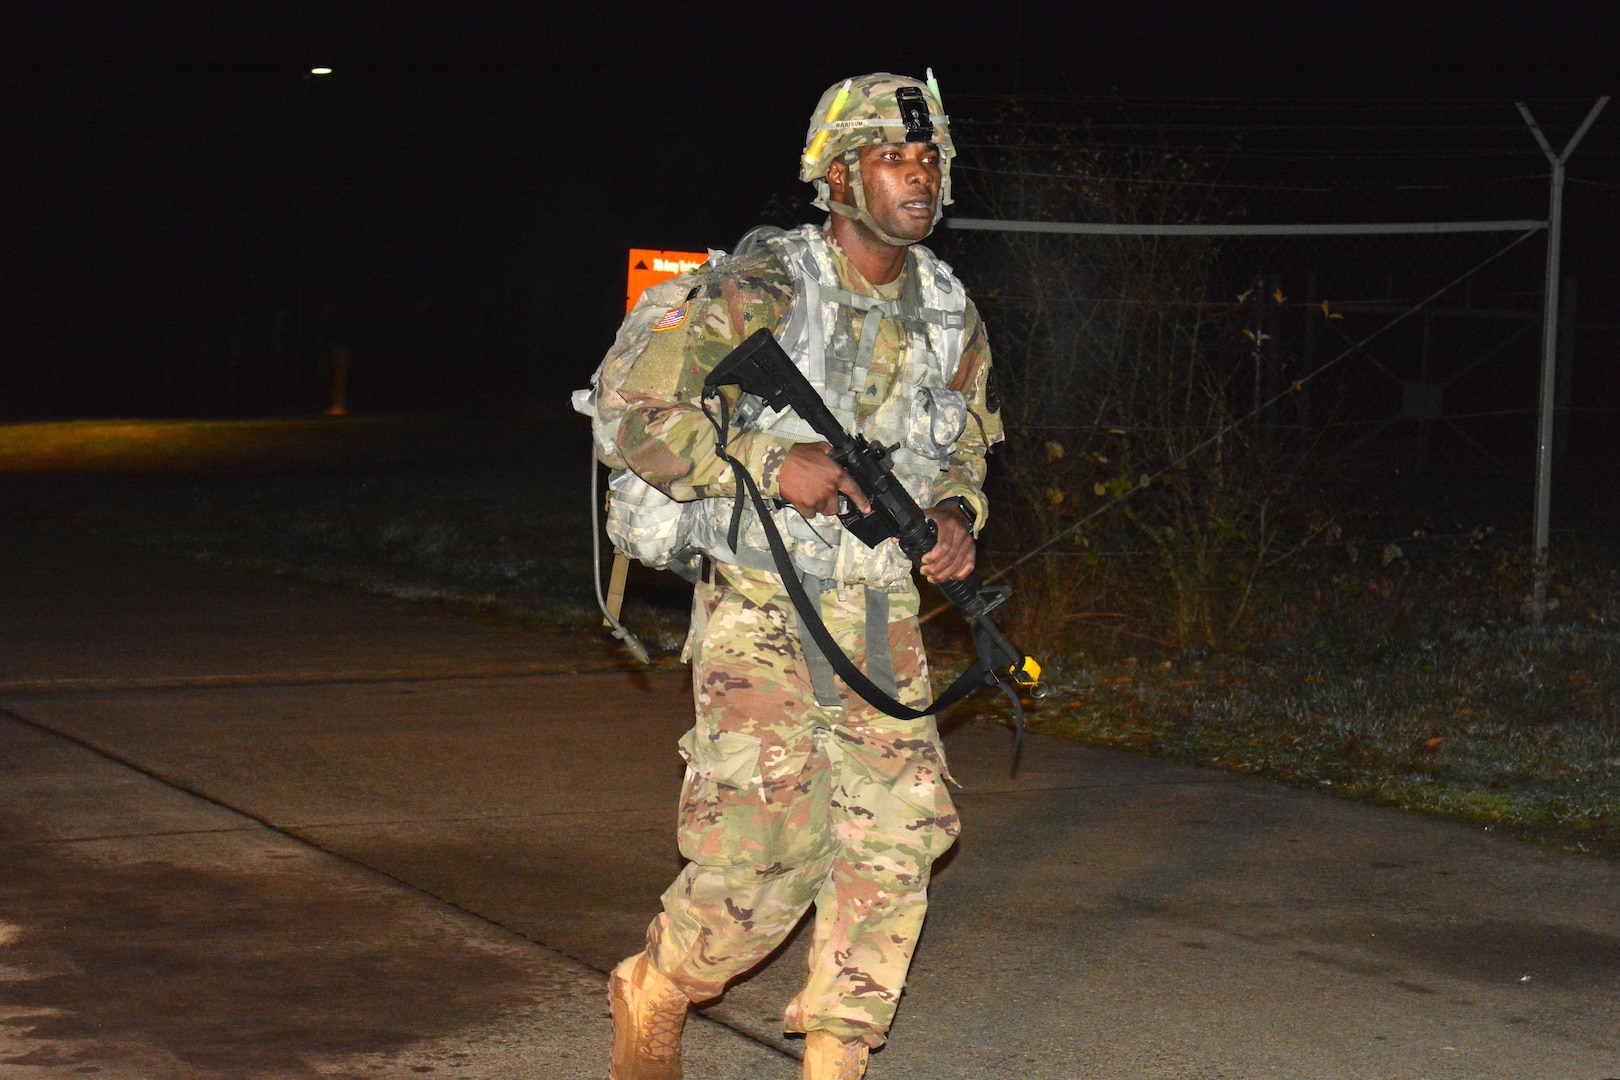 Sgt. James Gabisum, assigned to Landstuhl Regional Medical Center, completes the road march portion of the Regional Health Command Europe Best Warrior competition Nov. 3 and 4 in Baumholder.  Gabisum was the winner in the 'noncomissioned officer' category.